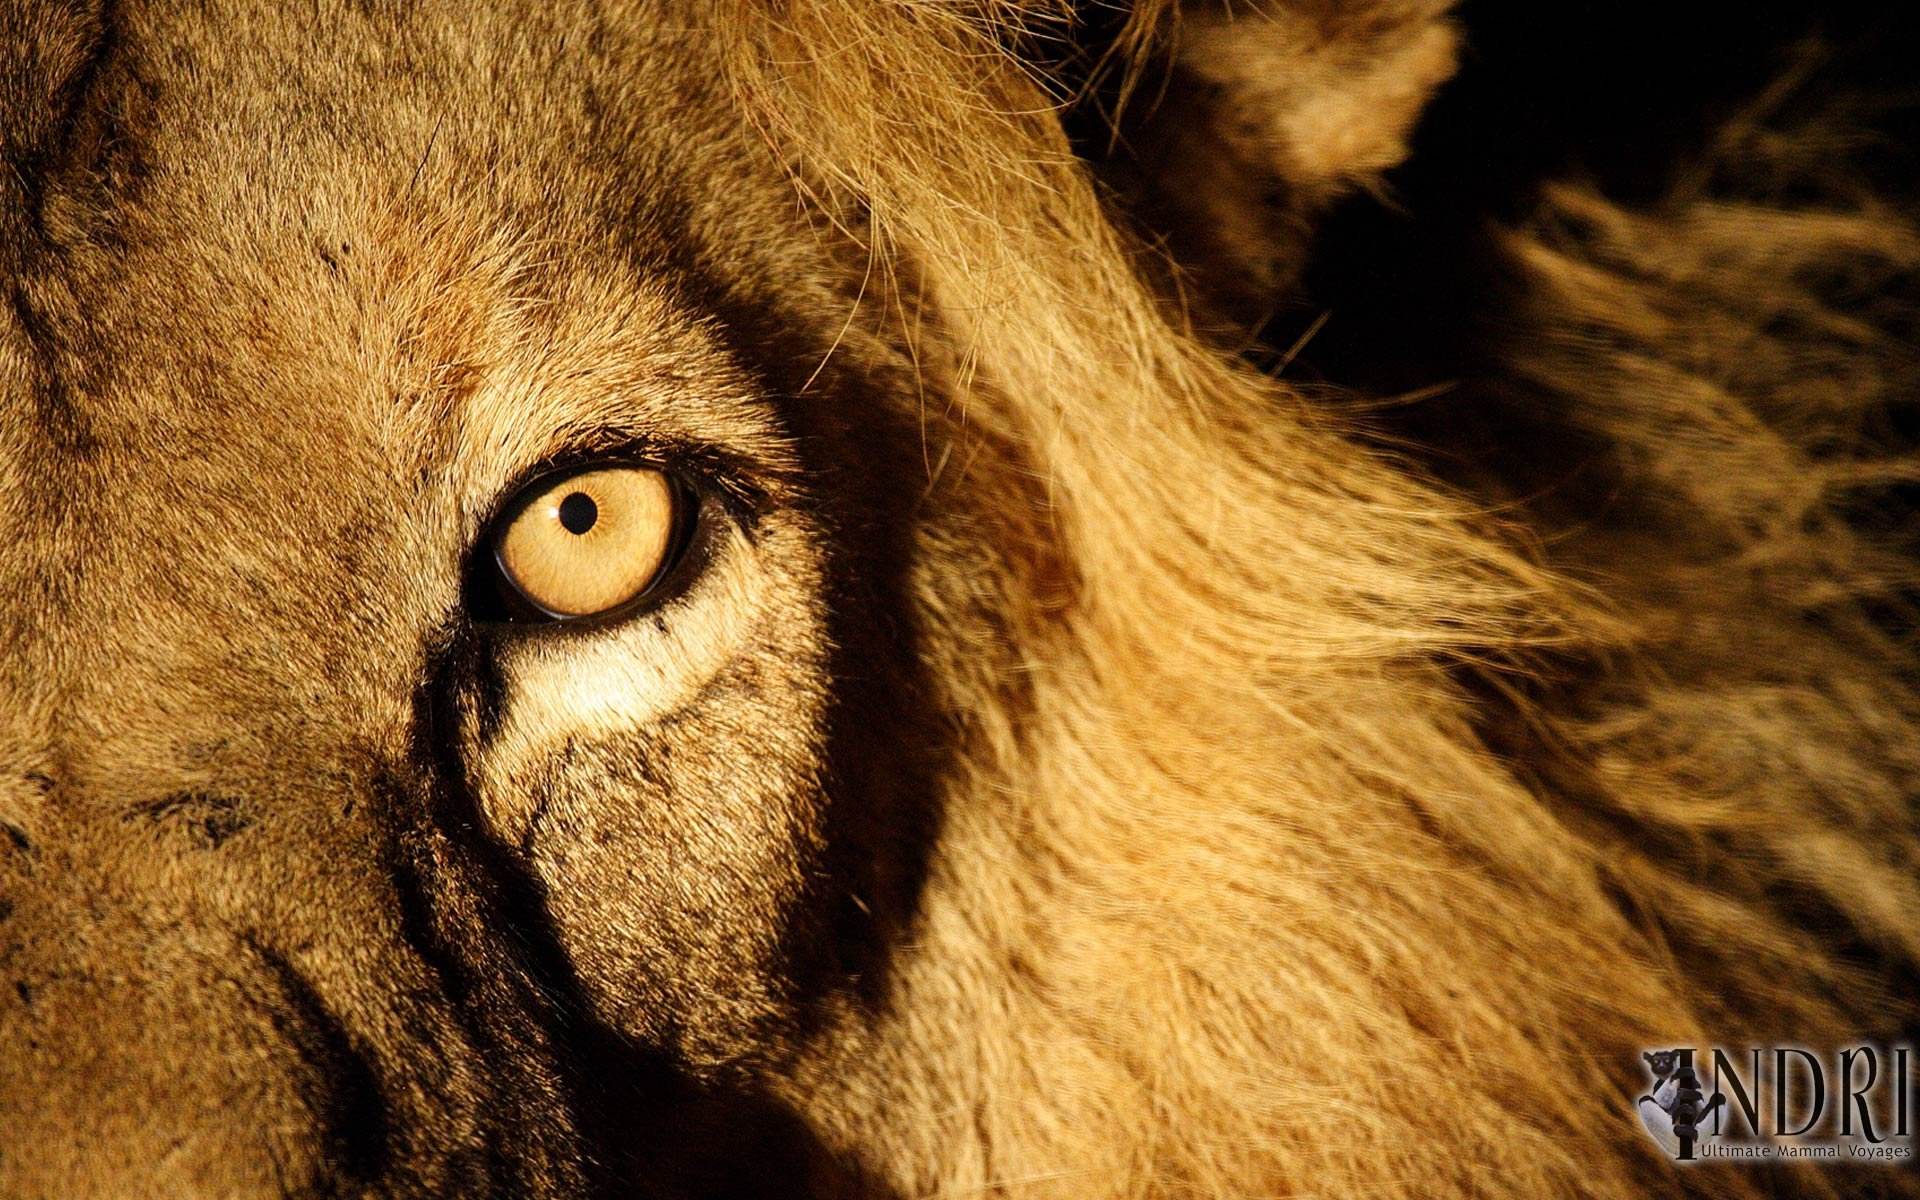 Angry Lion Image For Laptop Wallpaper - Lion Eyes - HD Wallpaper 